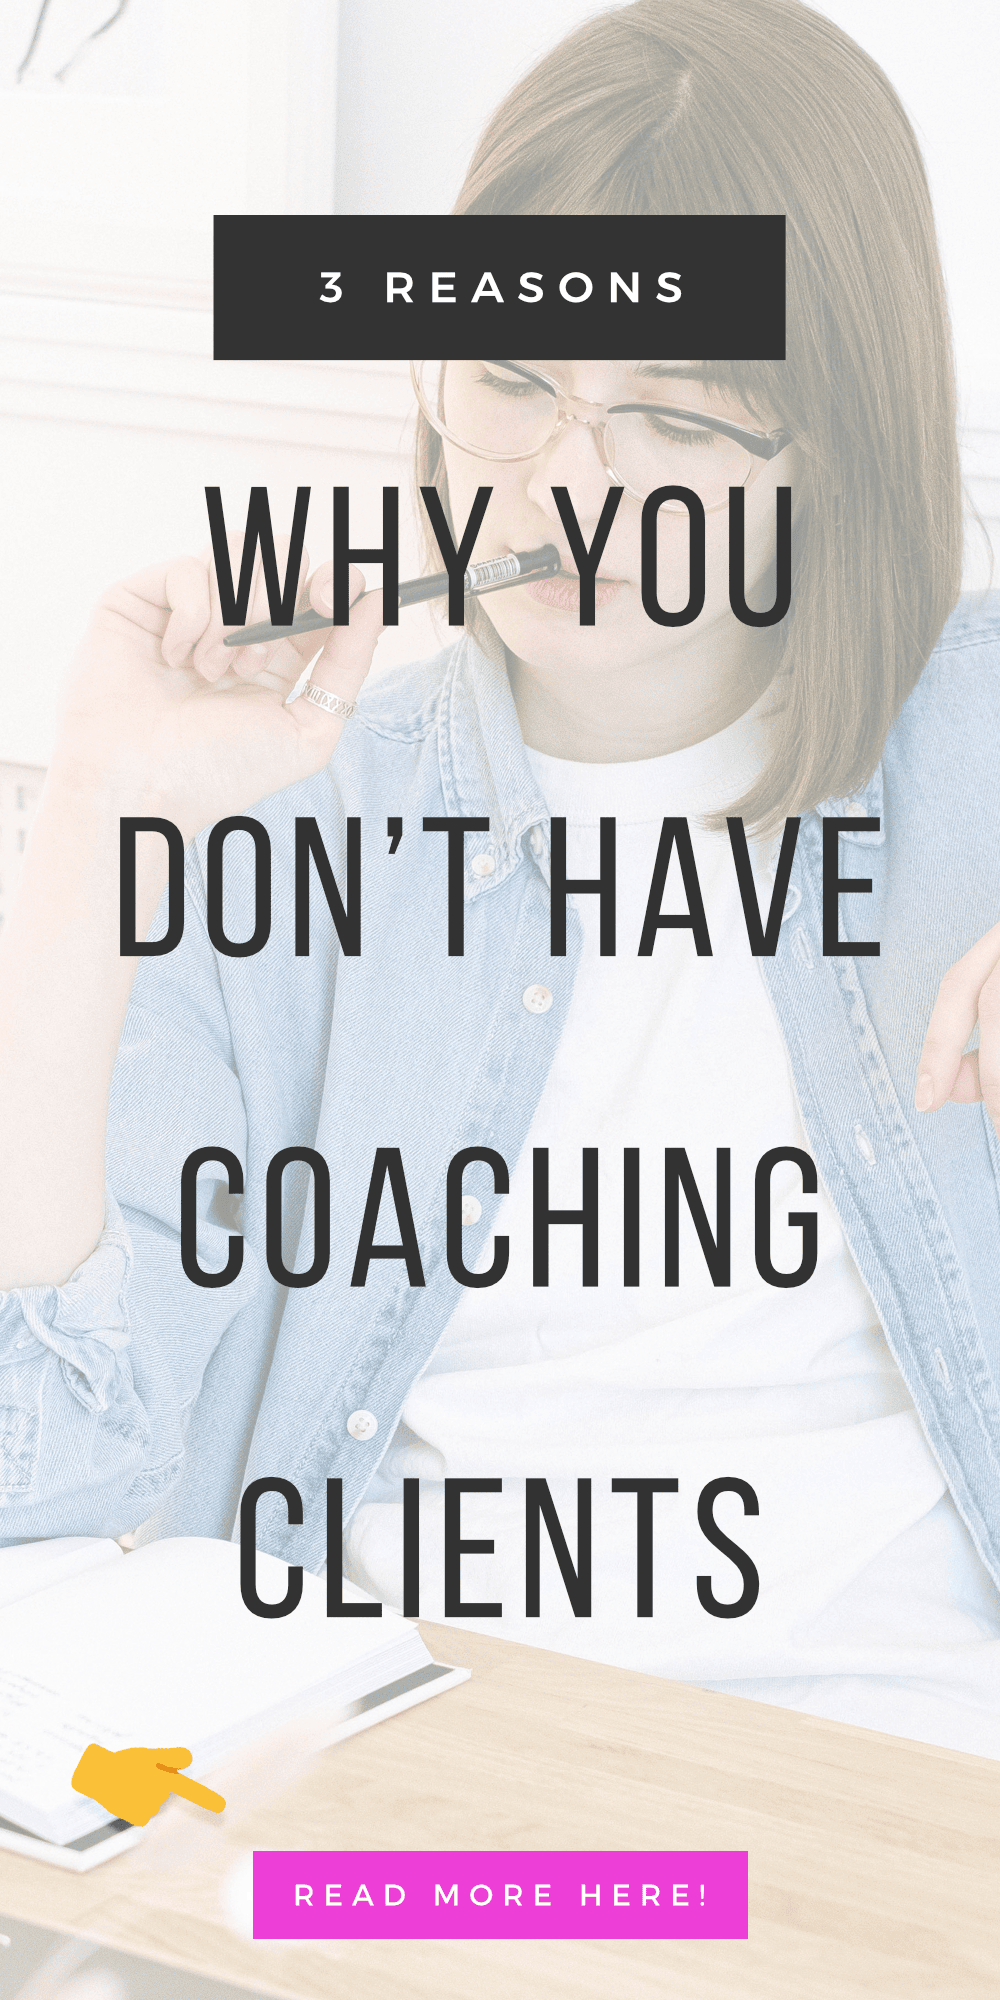 3 Reasons Why You Don't Have Coaching Clients